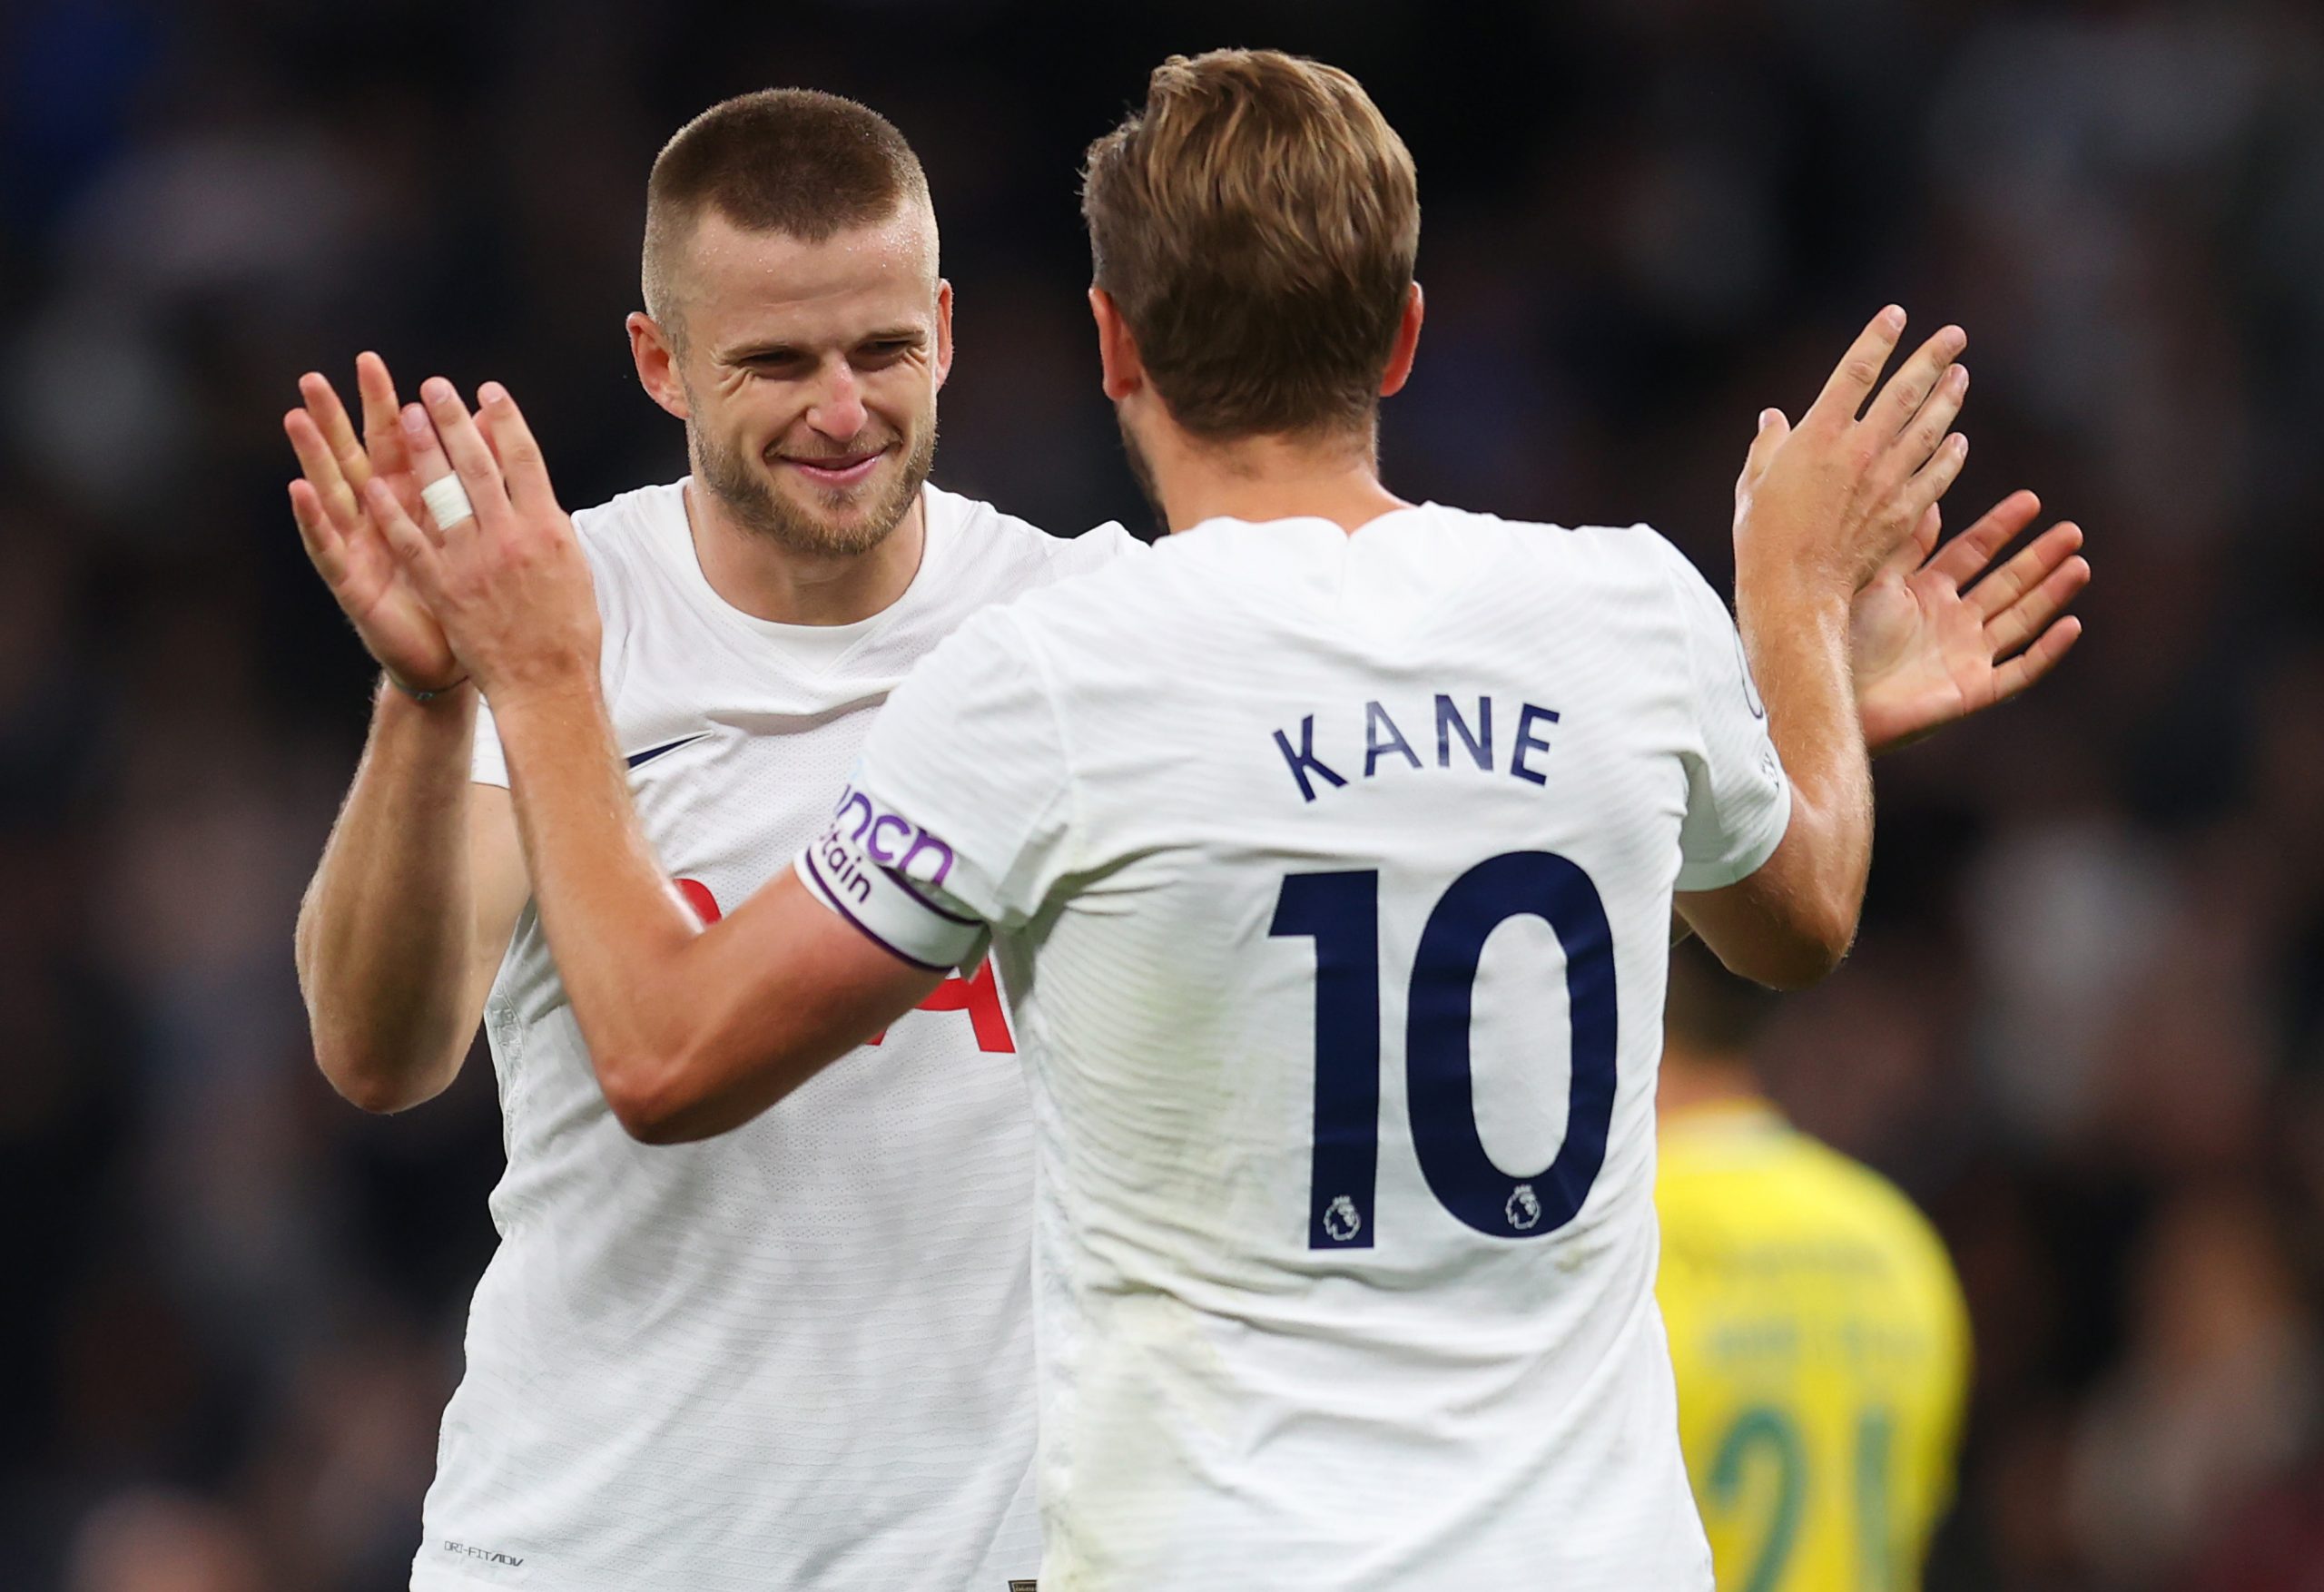 Harry Kane and Eric Dier are set to represent Tottenham Hotspur in the World Cup for England. (Photo by Catherine Ivill/Getty Images)